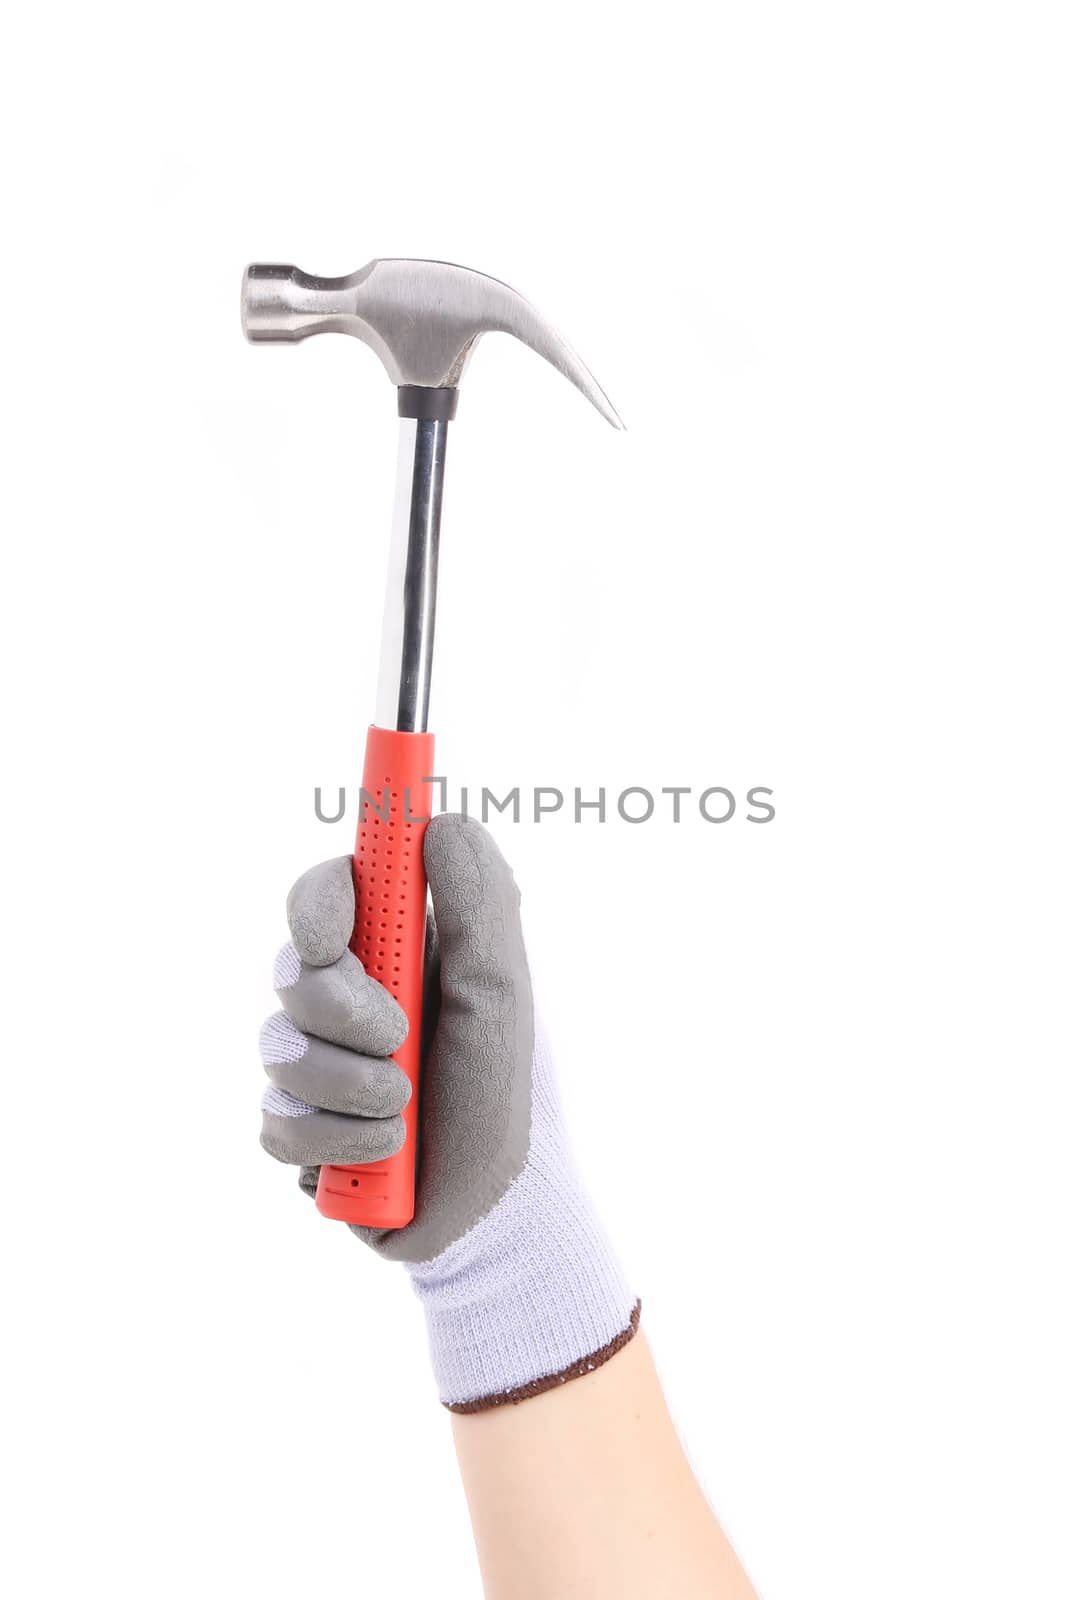 Hand in glove holding metal hammer. Isolated on a white background.